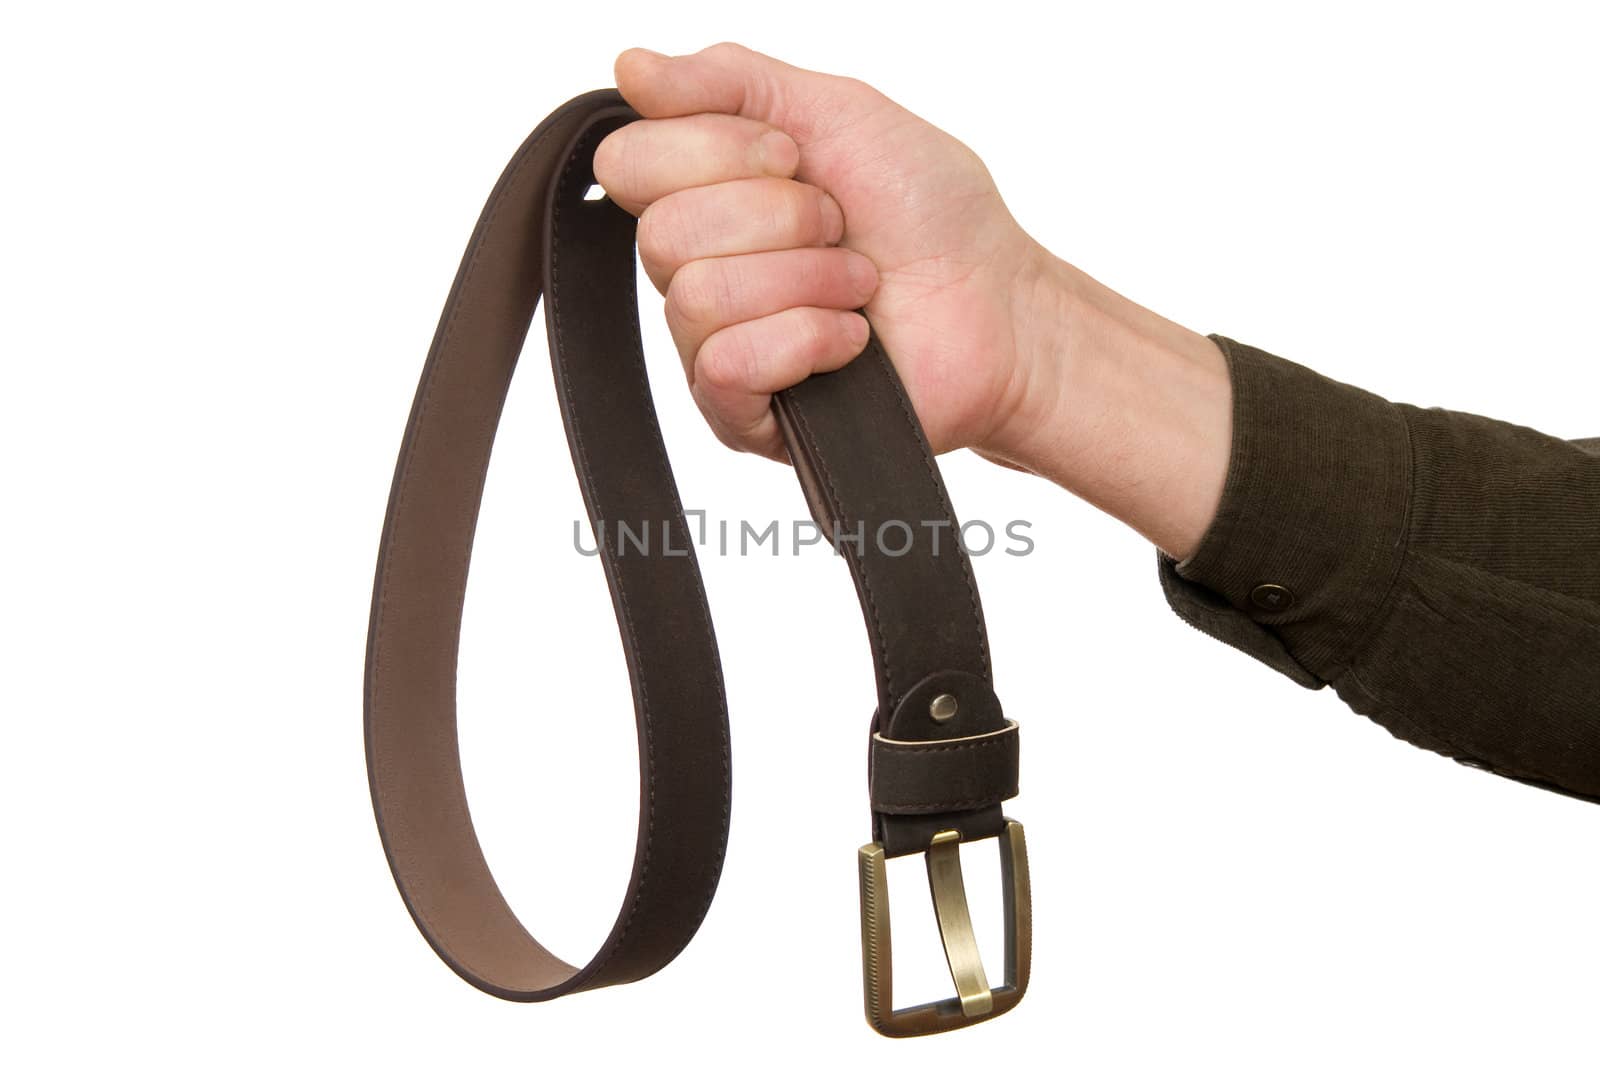 The man's hand holding a leather belt